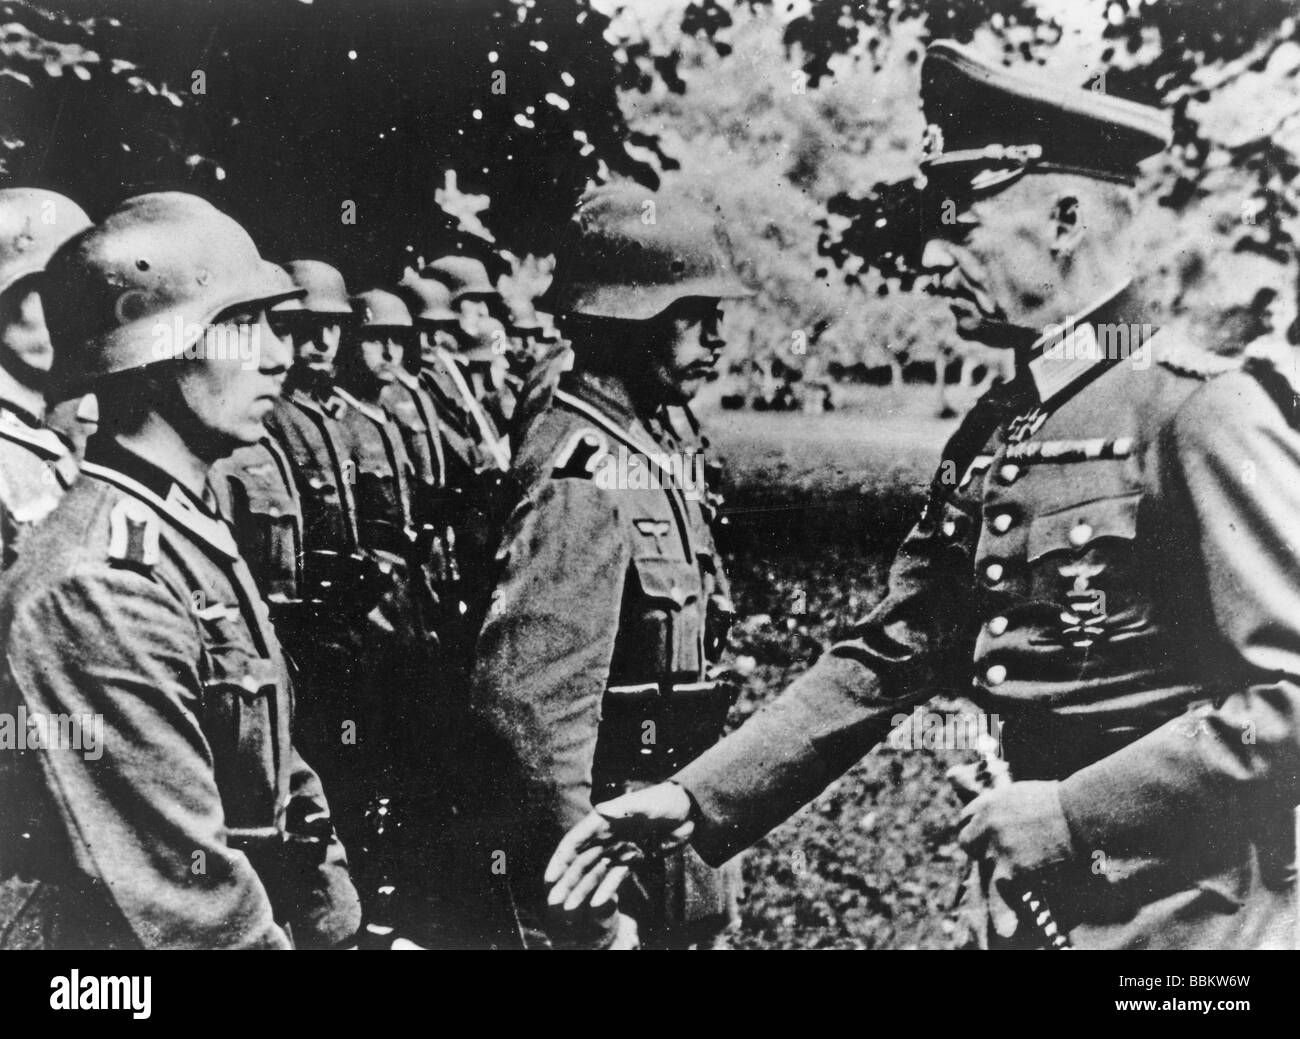 GENERAL von RUNDSTEDT awarding Iron Crosses after the Dieppe Road in 1942 Stock Photo